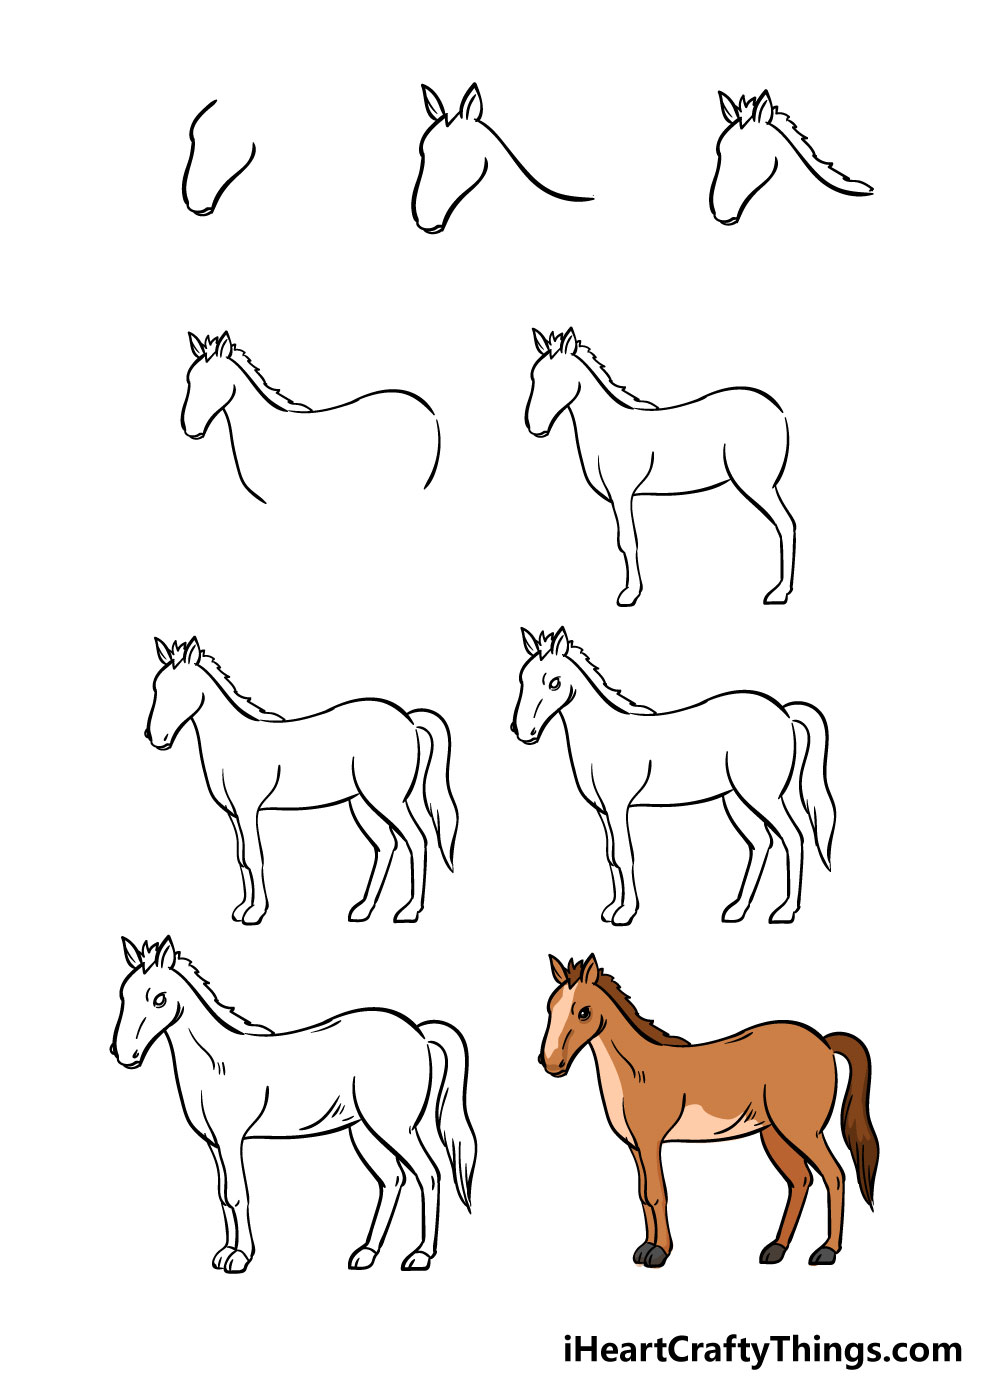 Horse Drawing How To Draw A Horse Step By Step